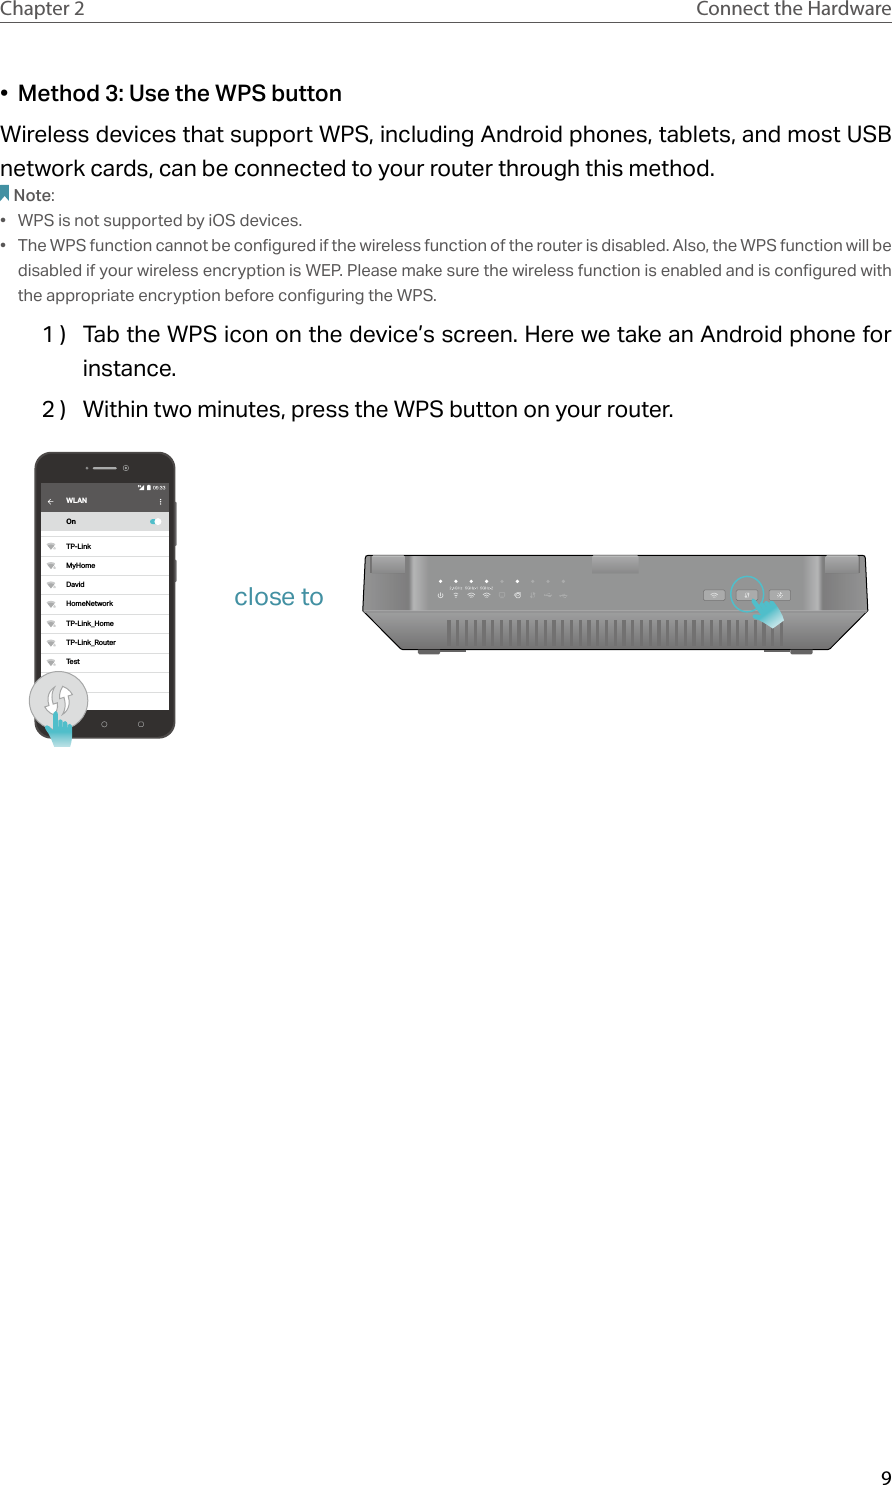 9Chapter 2 Connect the Hardware•  Method 3: Use the WPS buttonWireless devices that support WPS, including Android phones, tablets, and most USB network cards, can be connected to your router through this method.Note:•  WPS is not supported by iOS devices.•  The WPS function cannot be configured if the wireless function of the router is disabled. Also, the WPS function will be disabled if your wireless encryption is WEP. Please make sure the wireless function is enabled and is configured with the appropriate encryption before configuring the WPS.1 )  Tab the WPS icon on the device’s screen. Here we take an Android phone for instance.2 )  Within two minutes, press the WPS button on your router. WLANOnTP-LinkMyHomeDavidHomeNetworkTP-Link_HomeTP-Link_RouterTestclose to